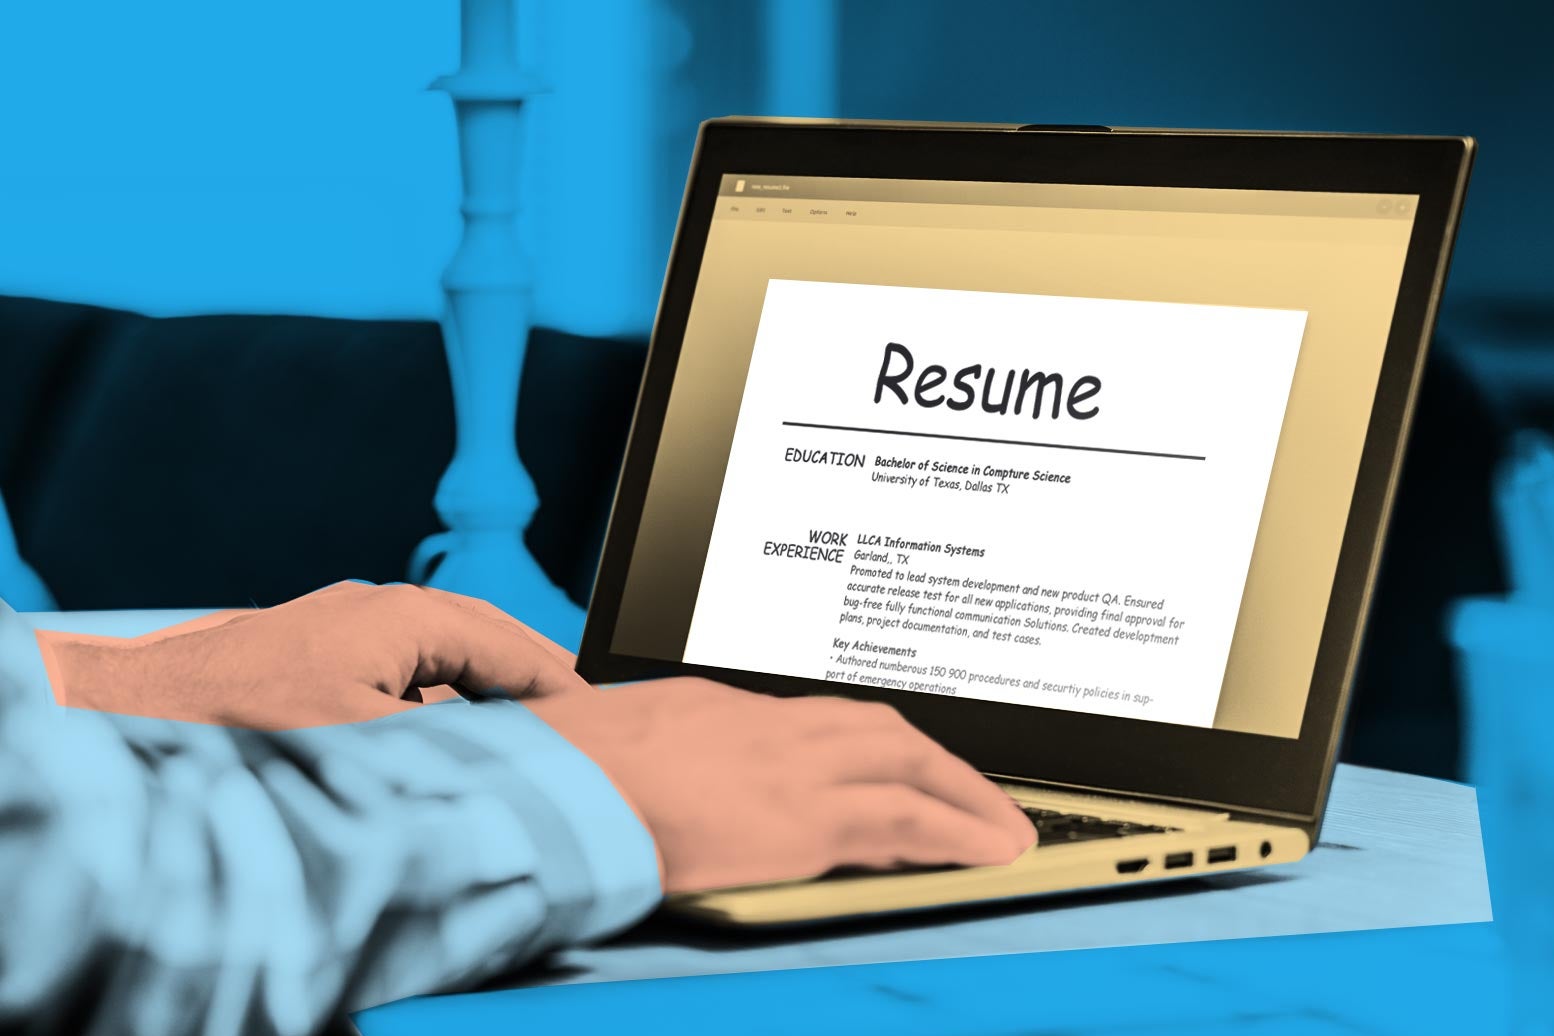 Photo illustration of a person on a computer typing a résumé in the Comic Sans font